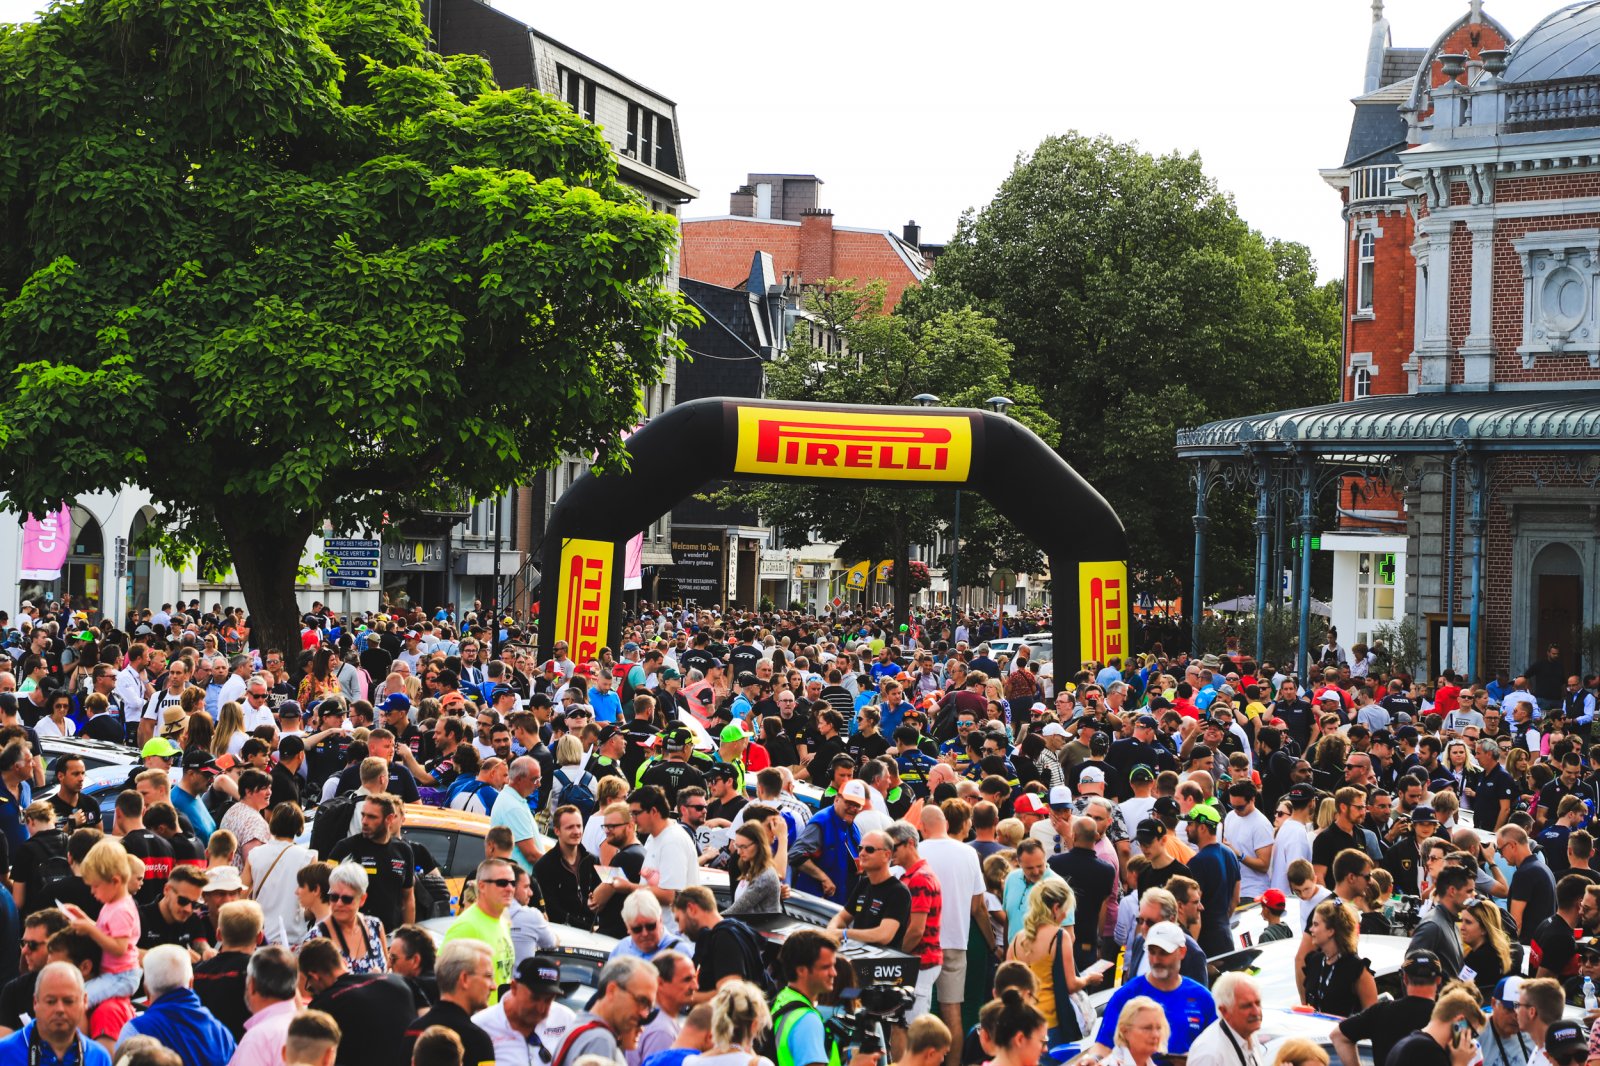 Thousands of fans welcome back the stars of GT racing at TotalEnergies 24 Hours of Spa parade